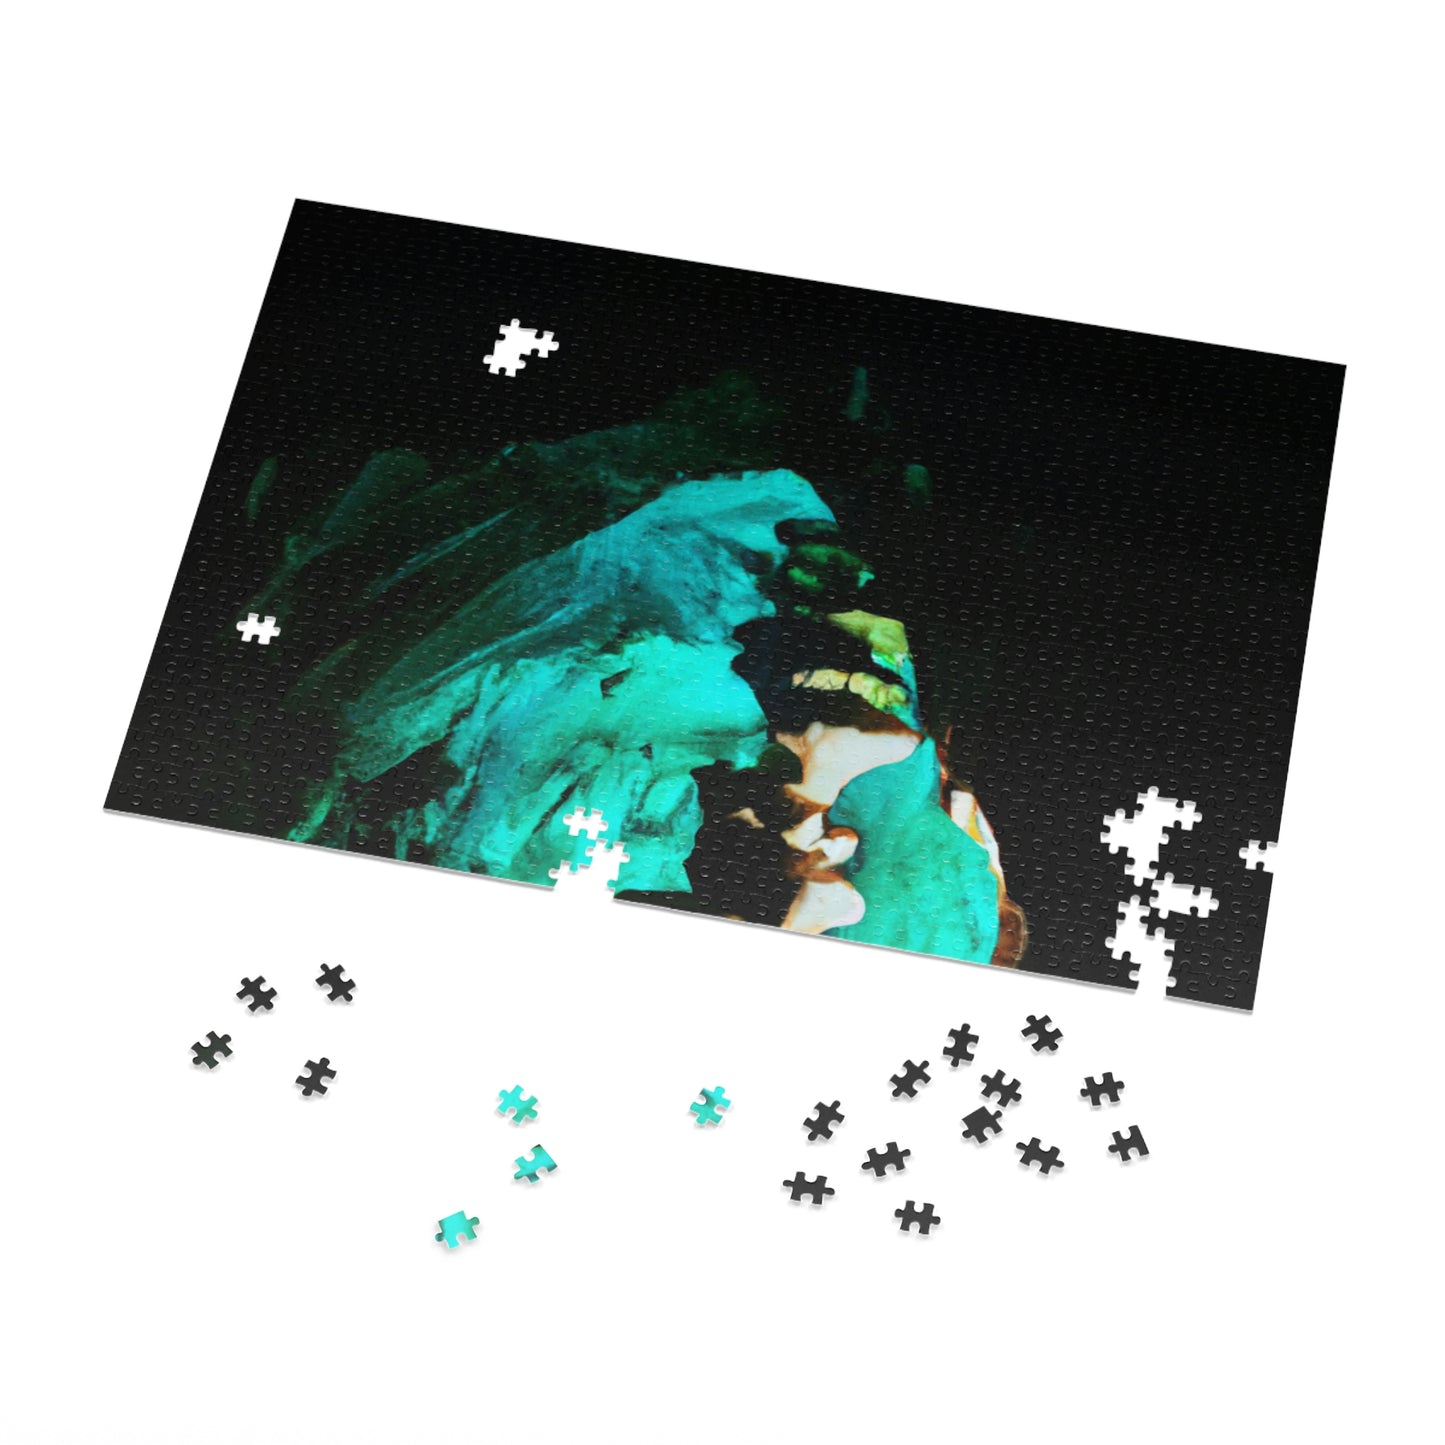 The Gleaming Relic of the Cave - The Alien Jigsaw Puzzle